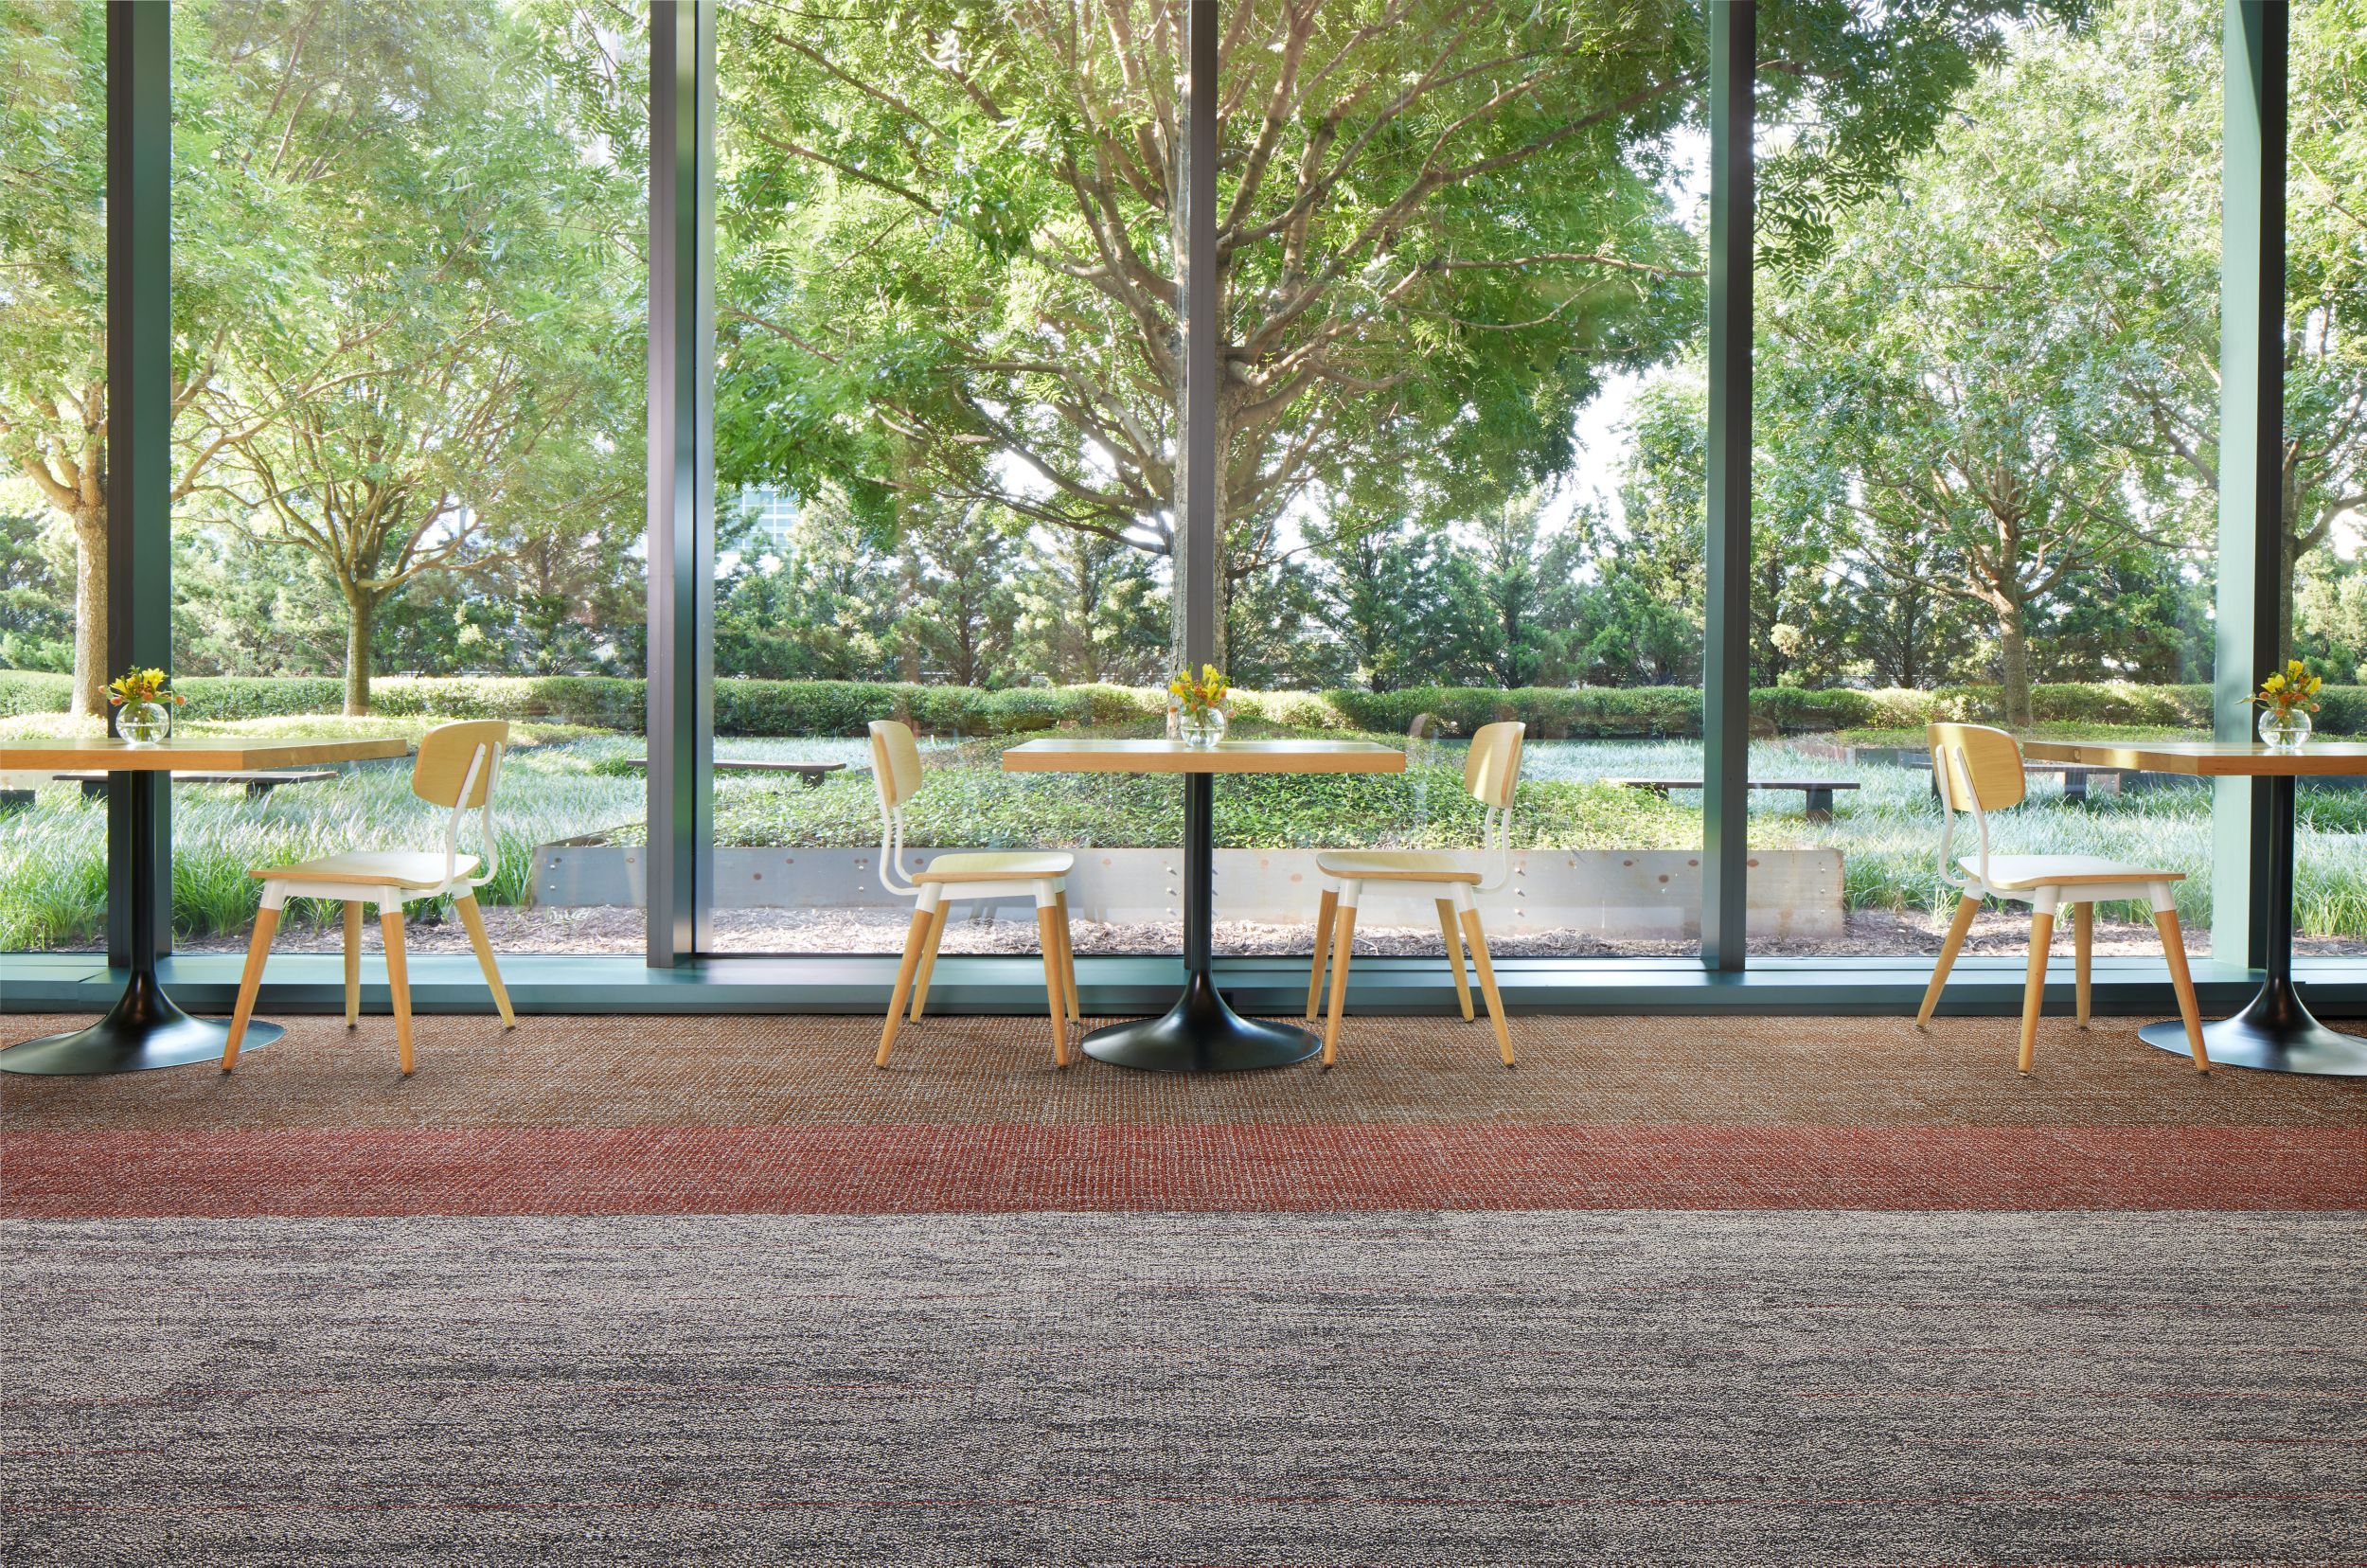 Interface Open Air Stria 402 and Open Ended carpet tile in lobby setting with tables and open plan windows image number 4